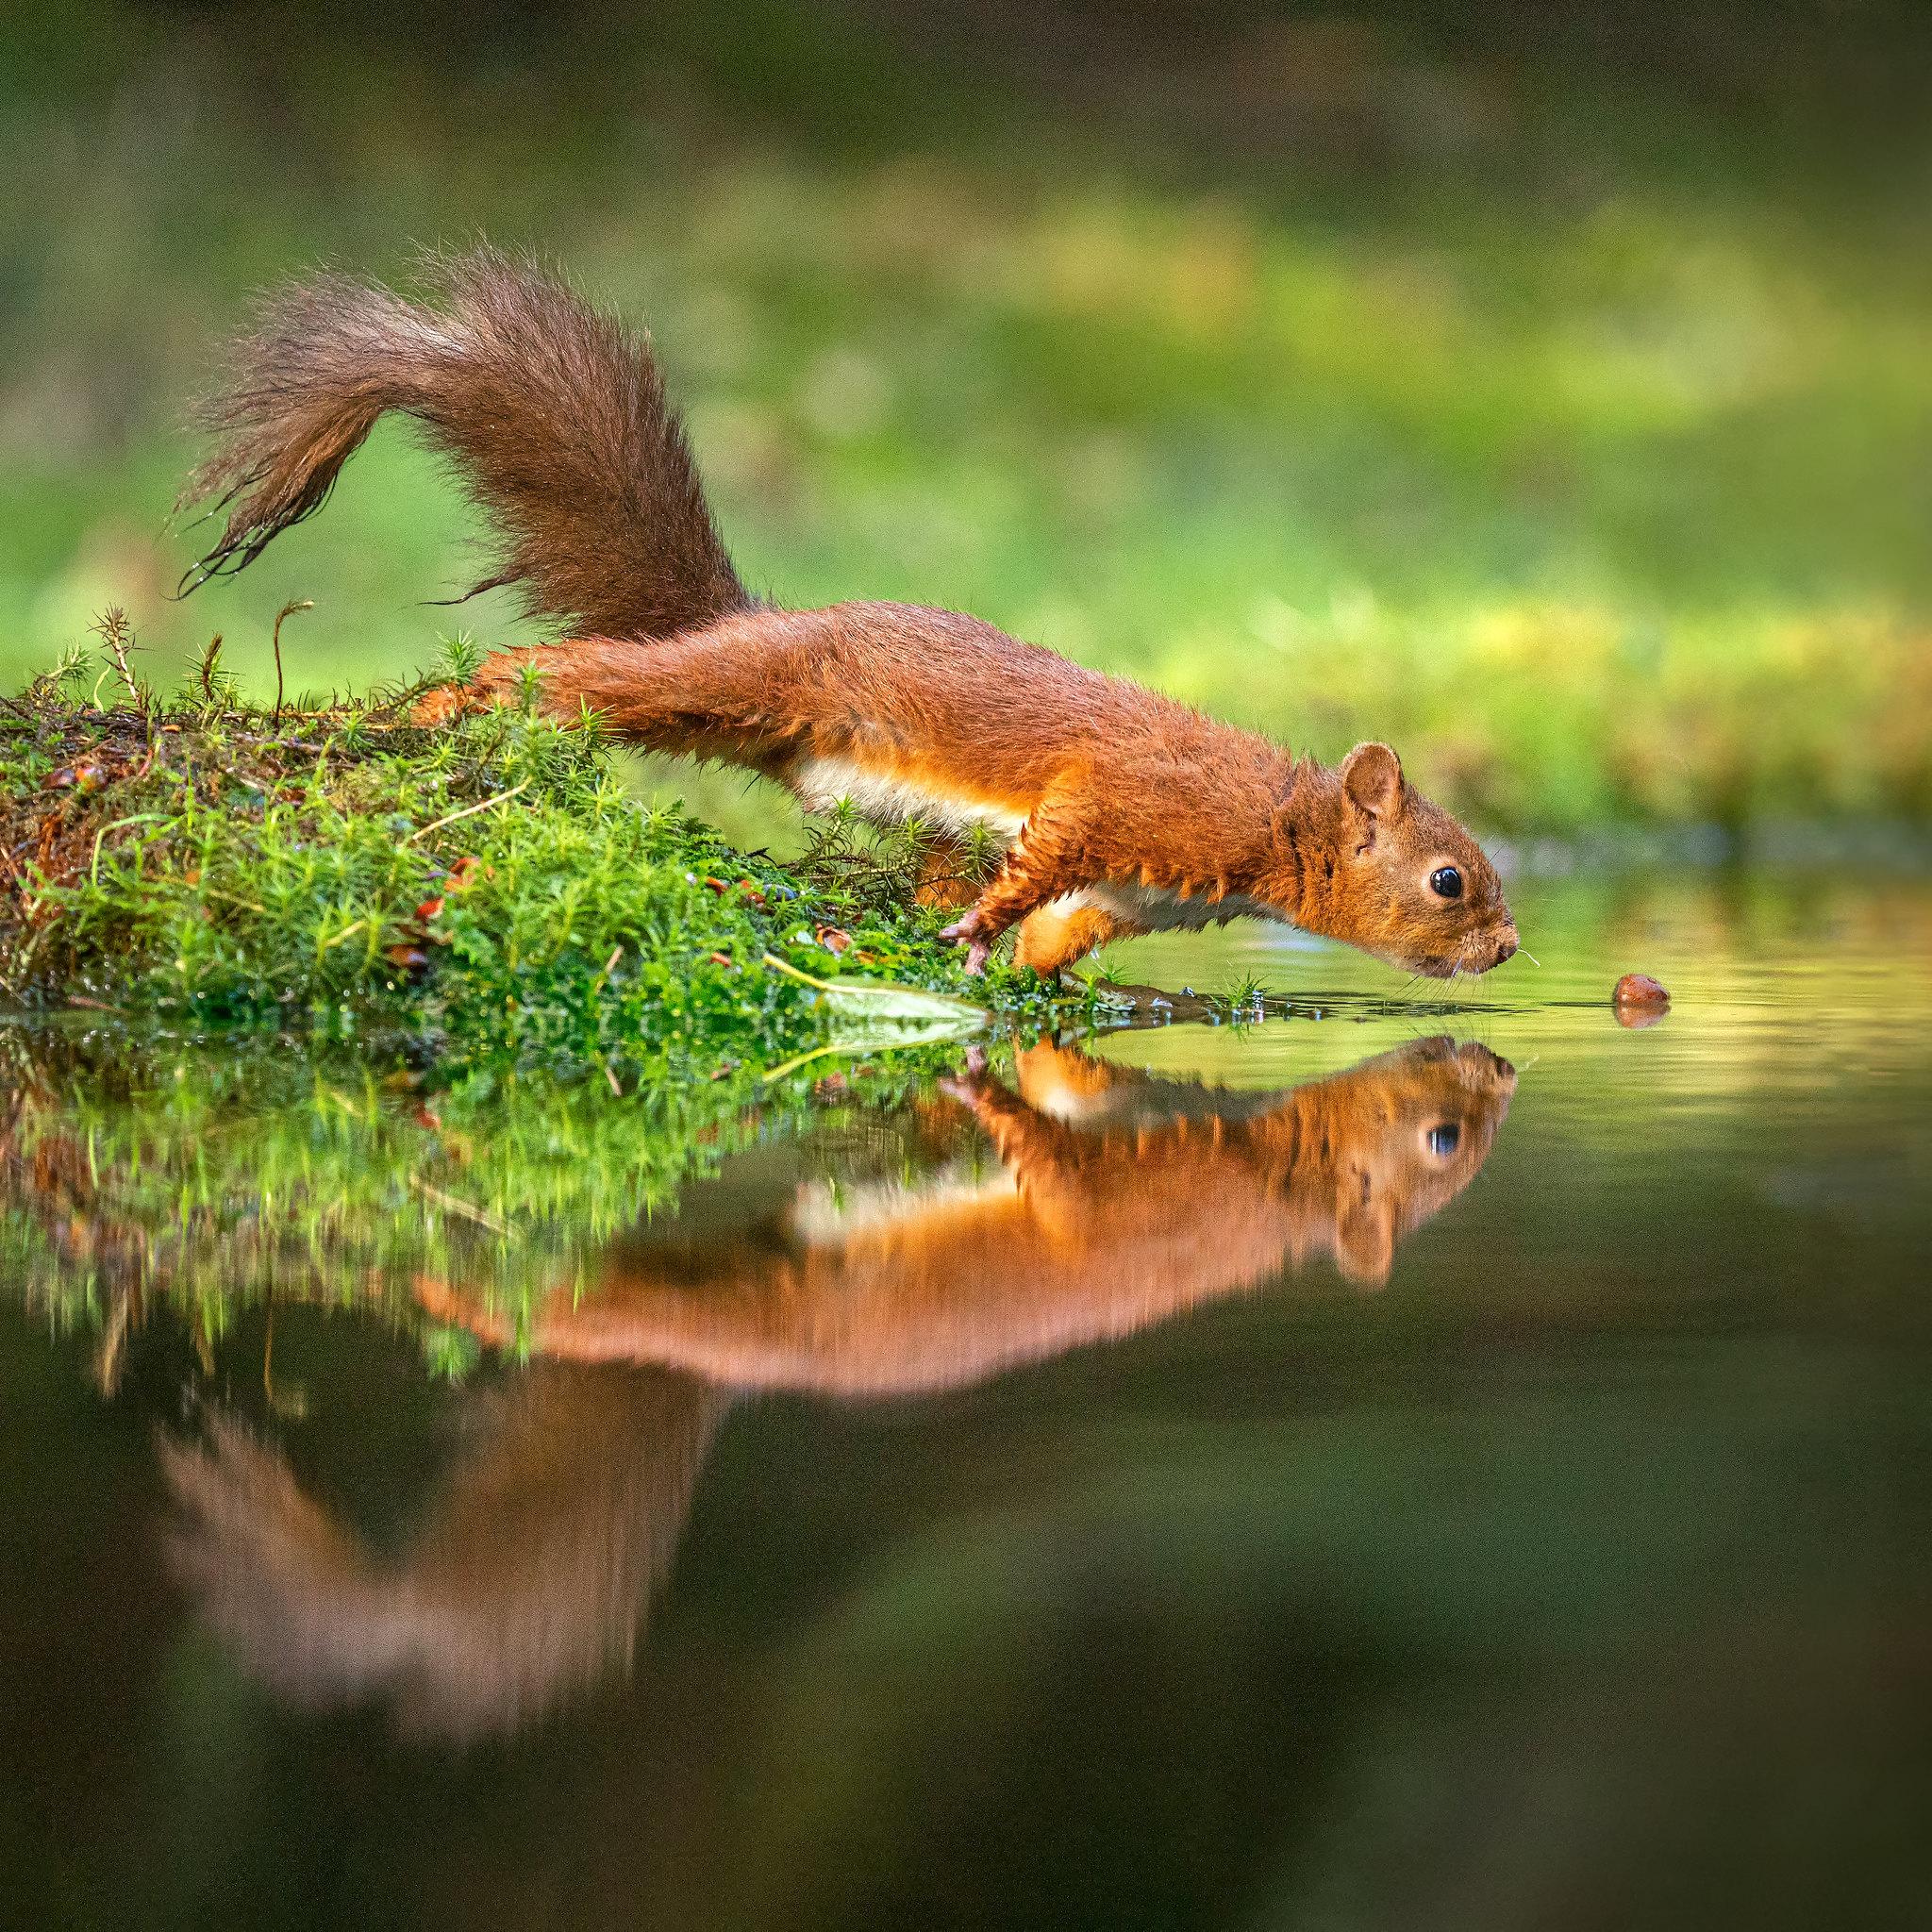 A curious squirrel reaches for a nut in the lake